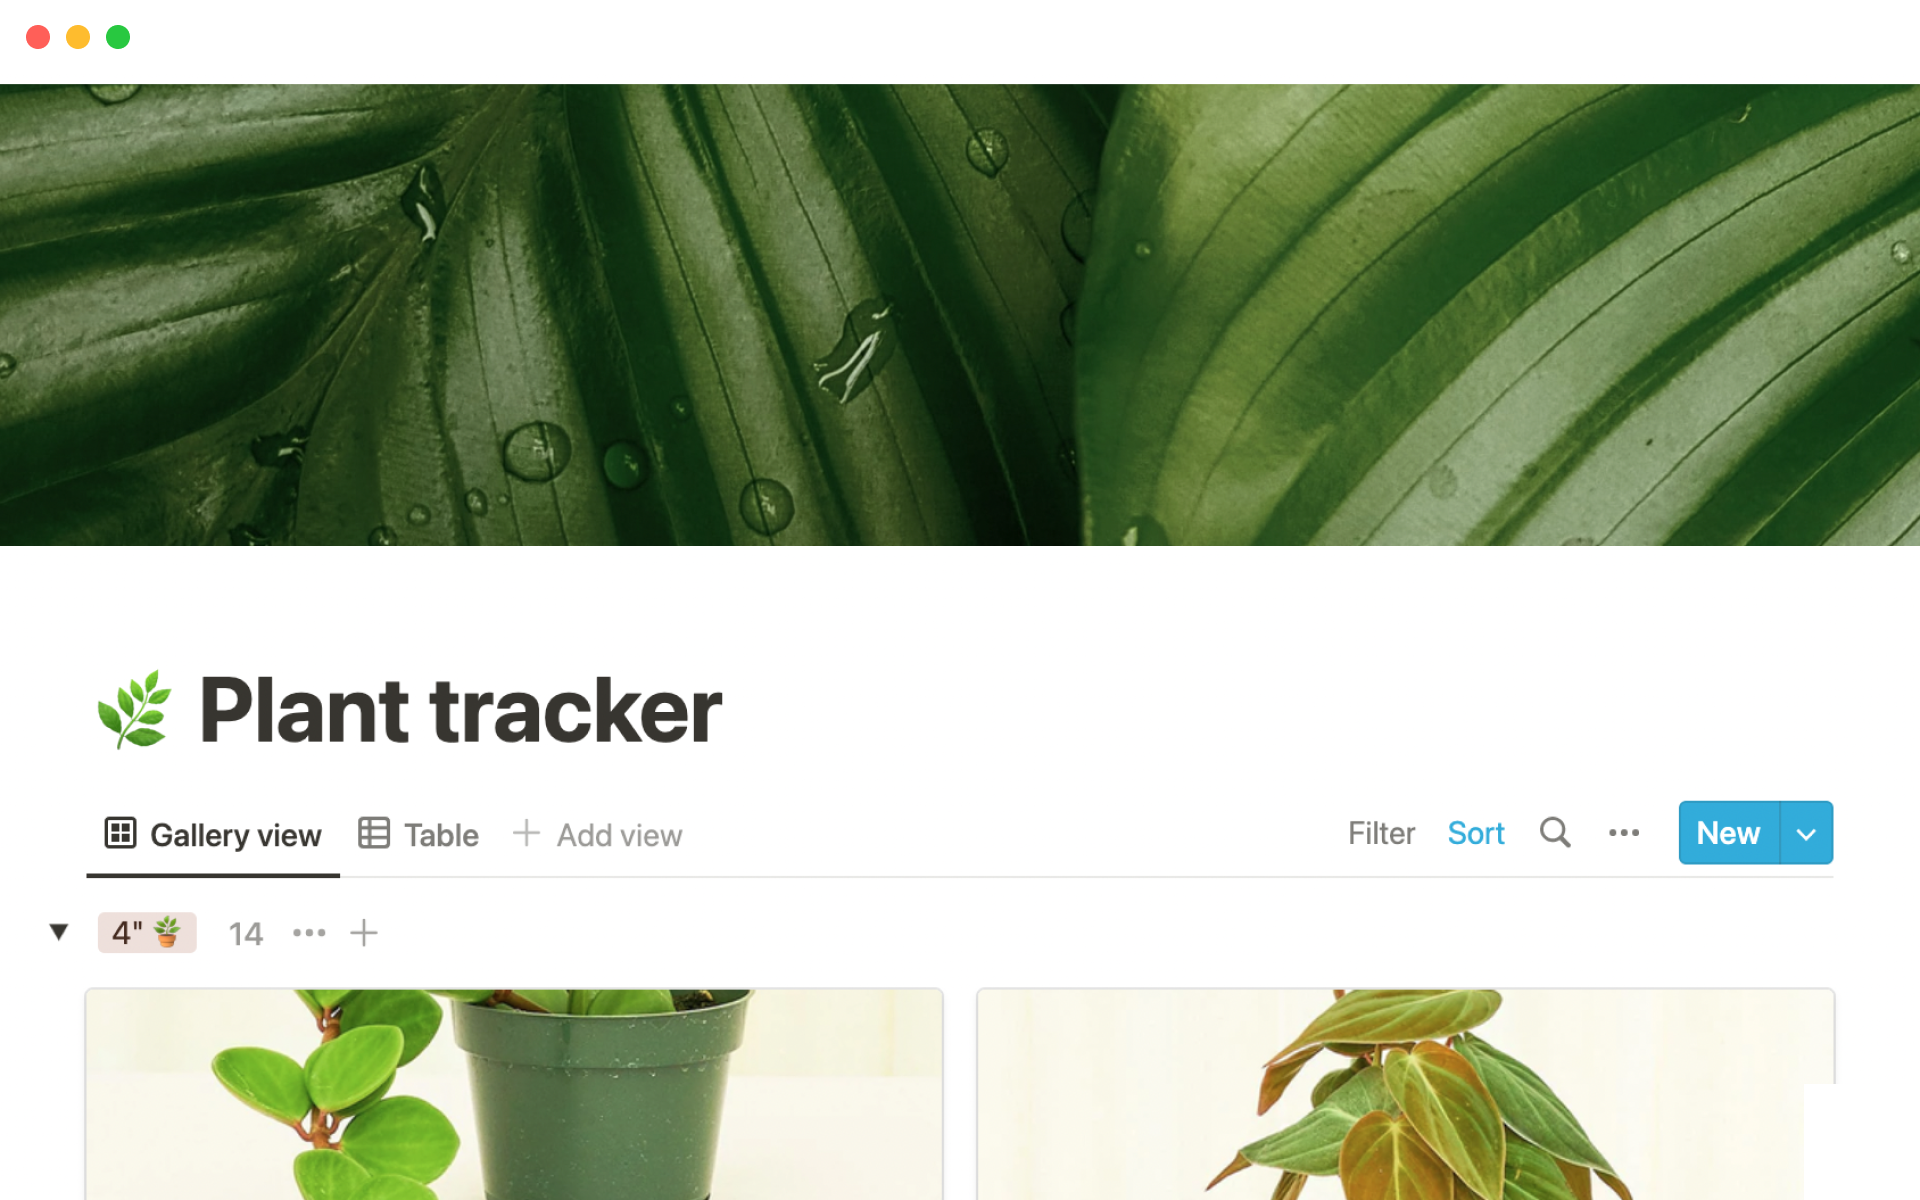 Keep track of your plant collection and manage each one's care information.